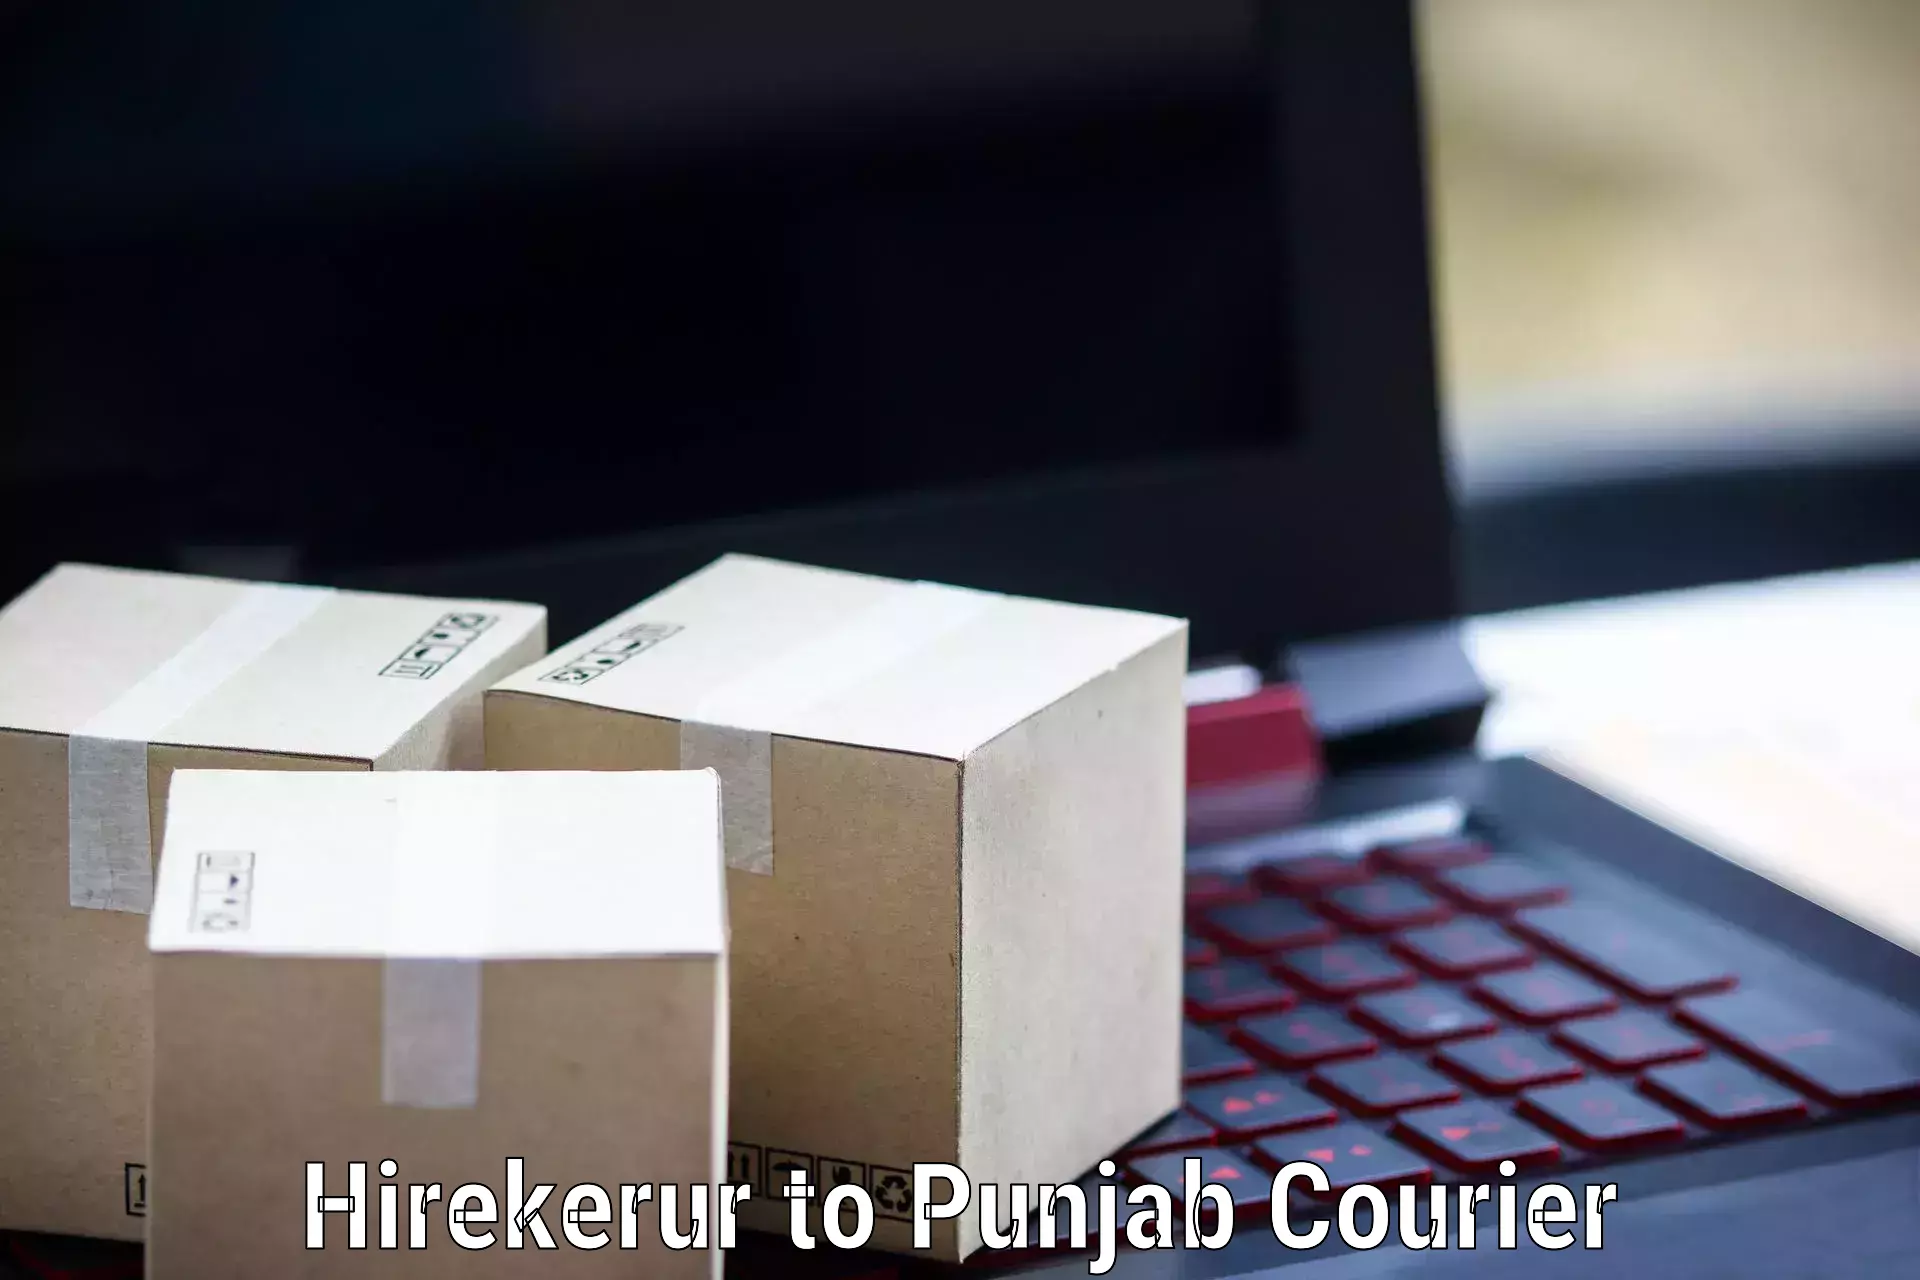 Delivery service partnership in Hirekerur to Nawanshahr